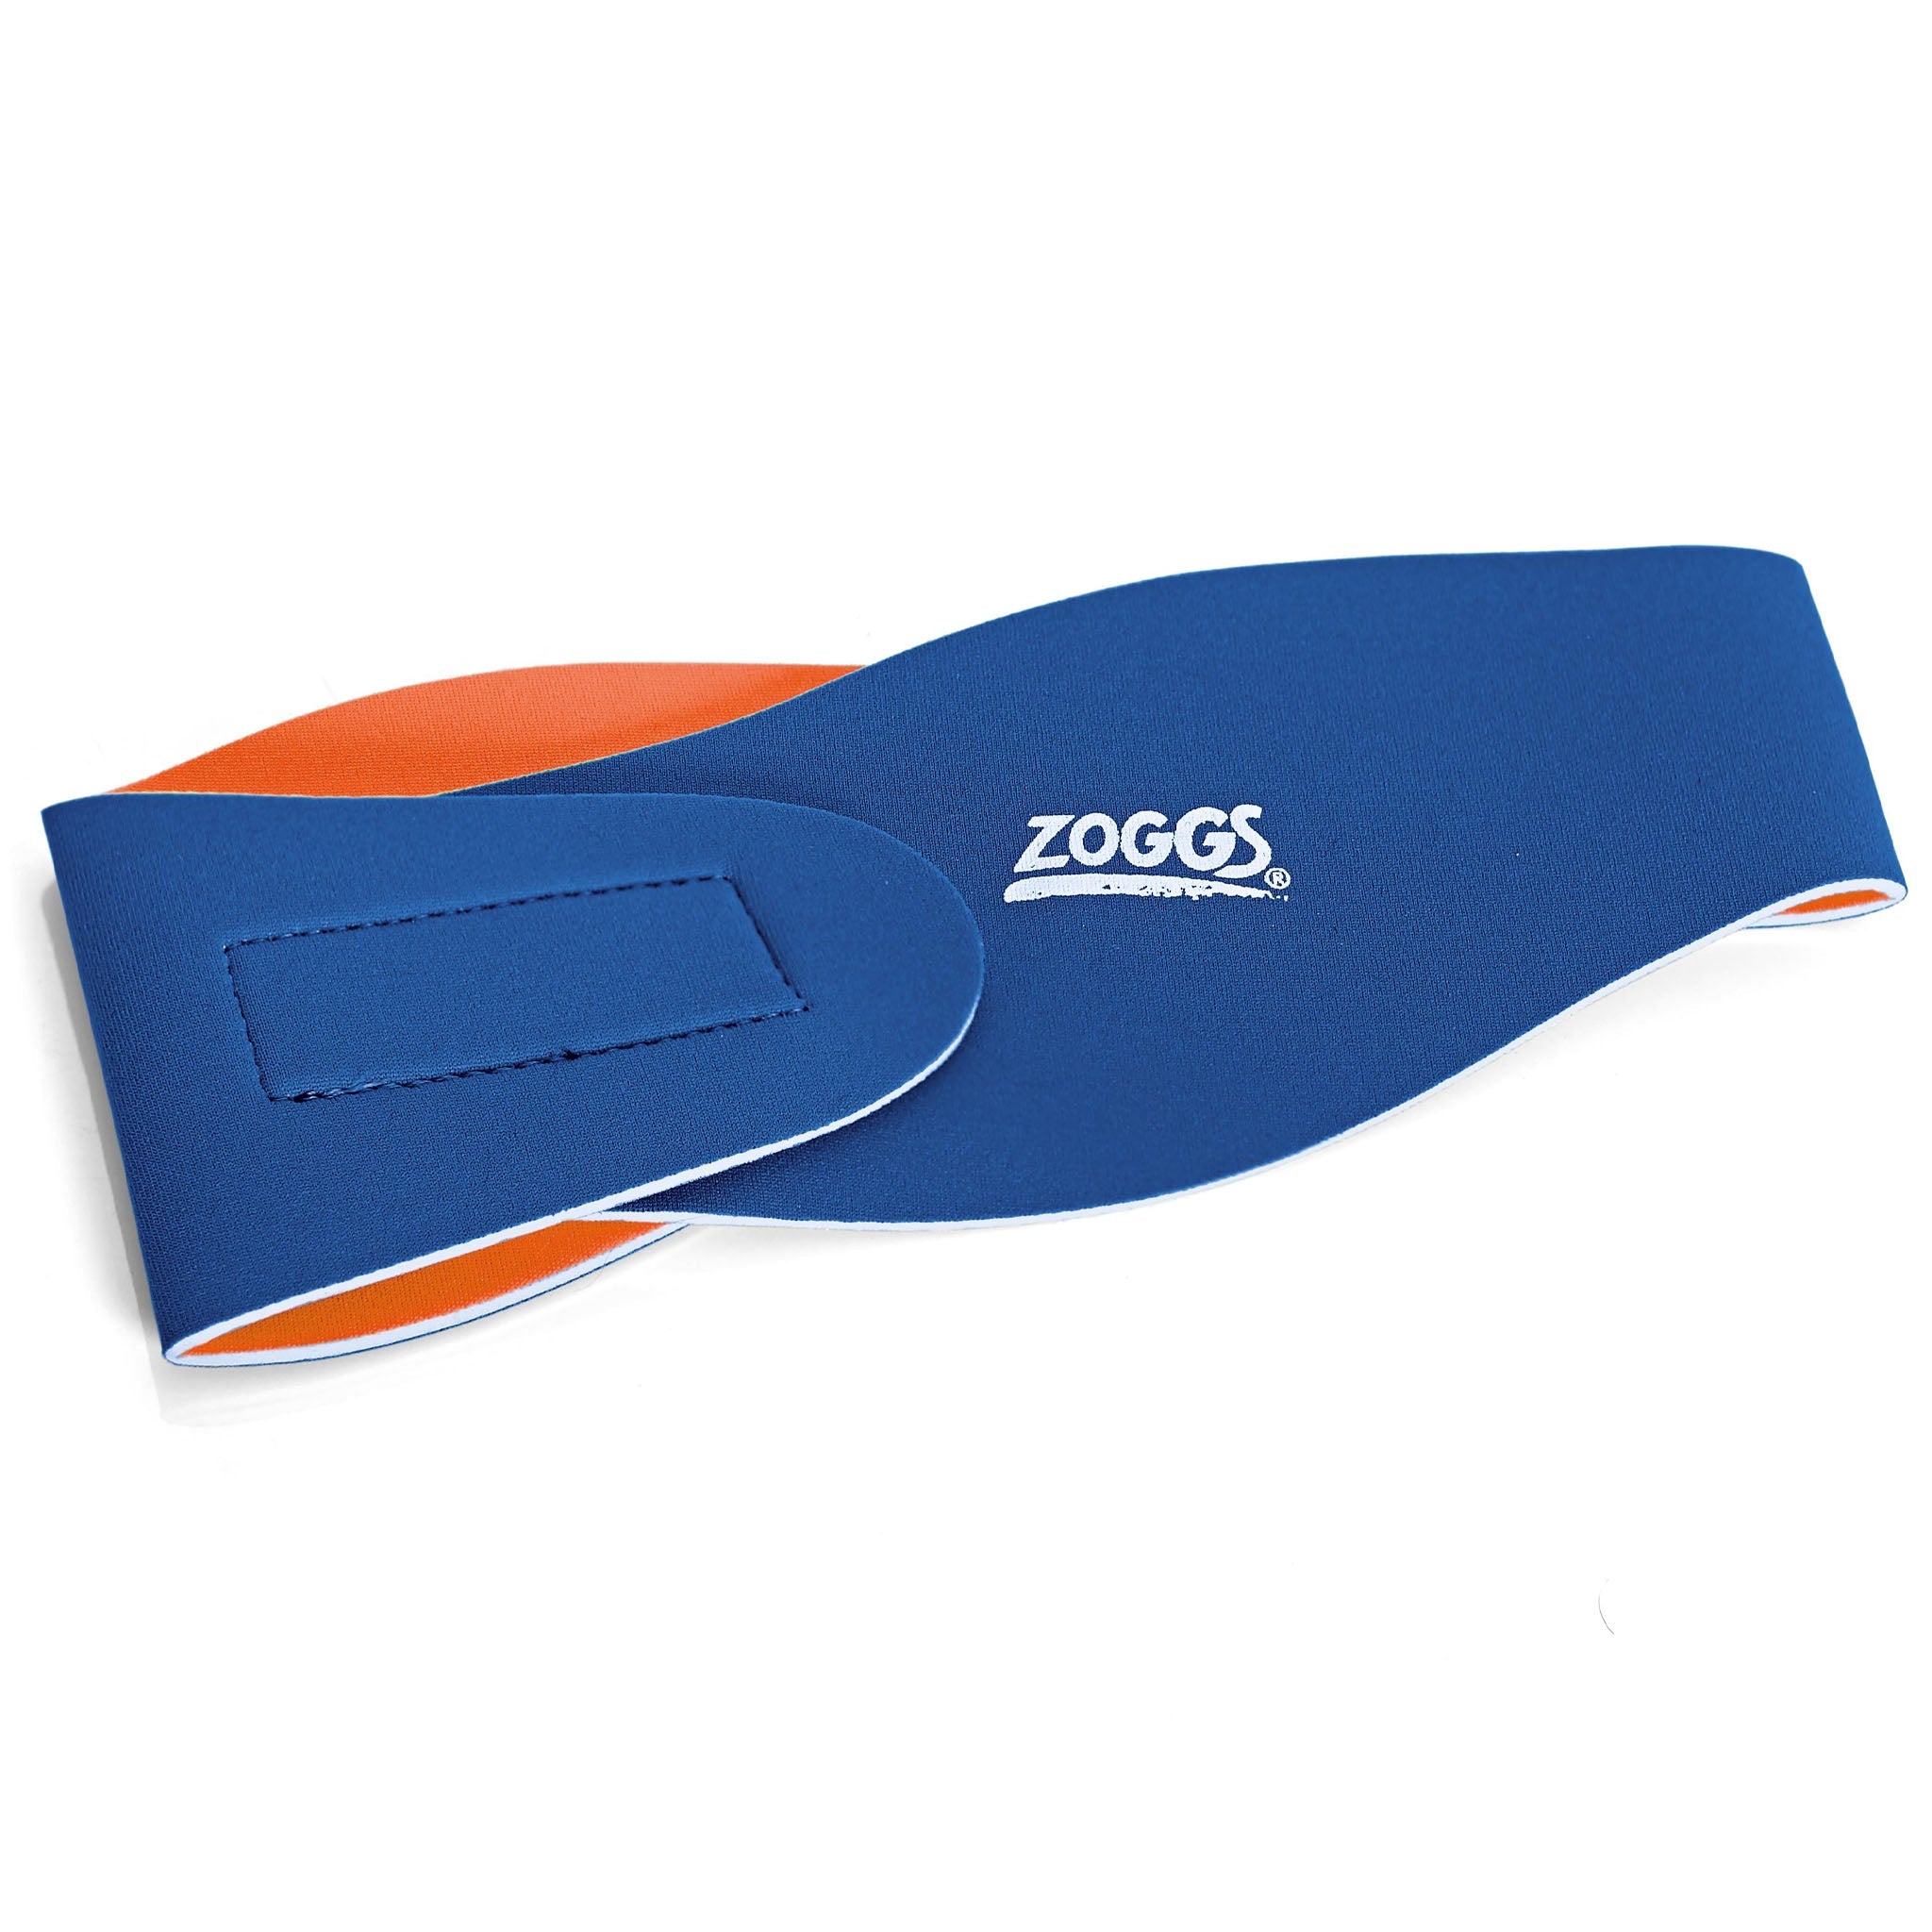 Zoggs Ear Band for Swimming | Small Blue/Orange